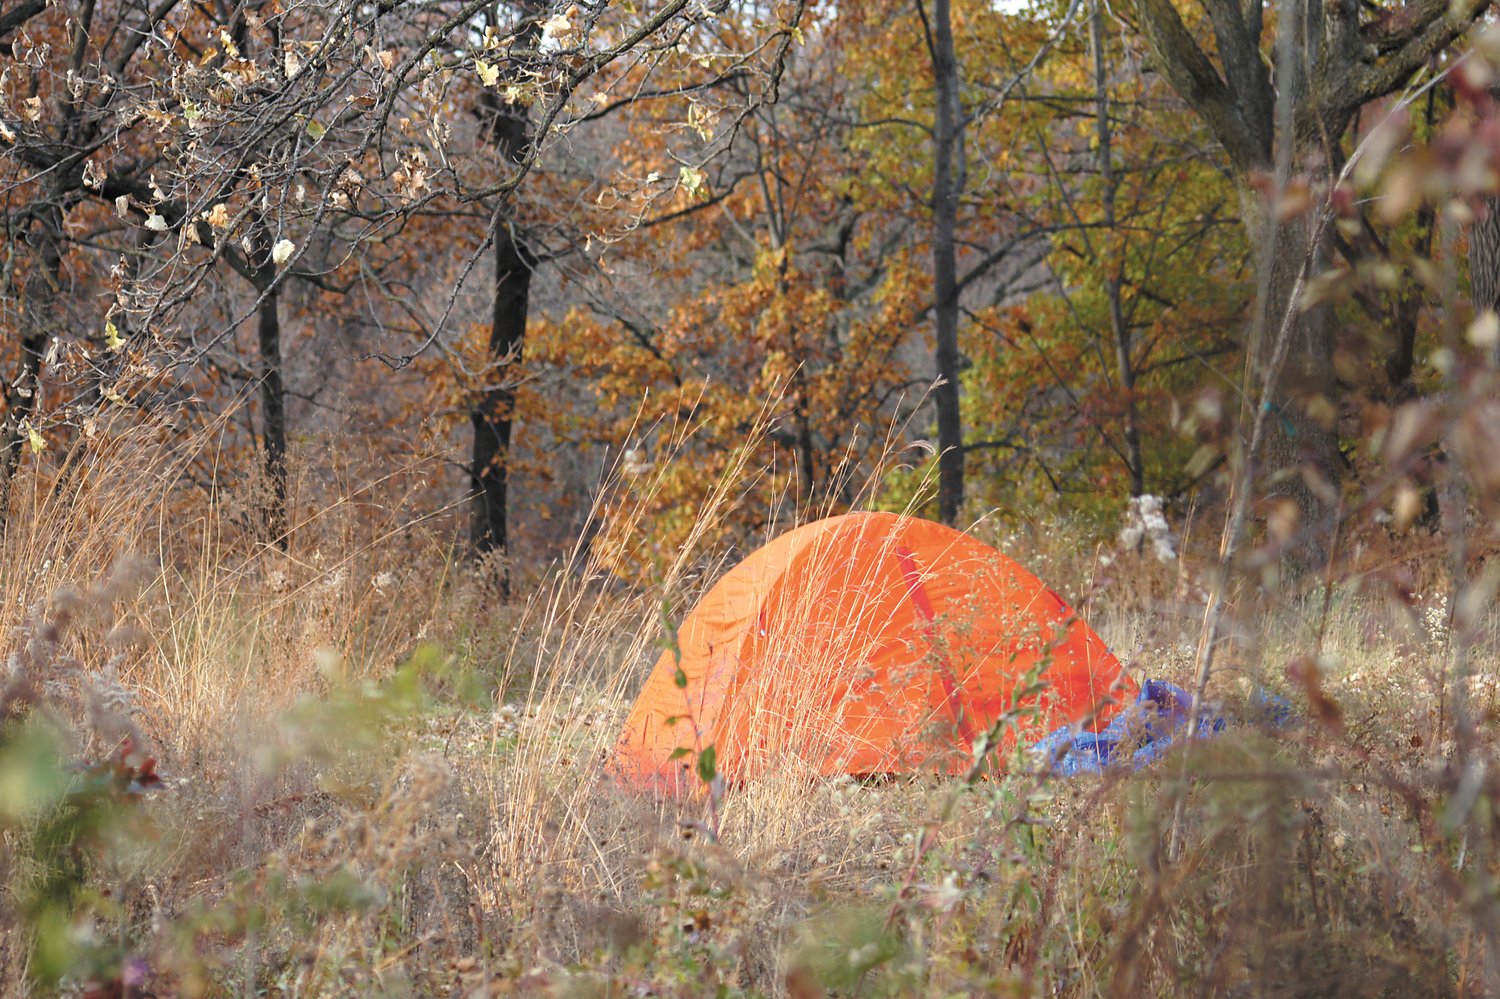 Tents are set up at various places in Minneapolis, including near a wooded park. Homelessness is prevalent throughout the state. According to Minnesota Homeless Coalition (MHC) Executive Director Rhonda Otteson, 80 out of 87 counties lack enough shelter beds. Half of the people experiencing homelessness are youth up to age 24. People of Color are 10 times more likely than their White counterparts to be homeless. (Photos by Terry Faust)